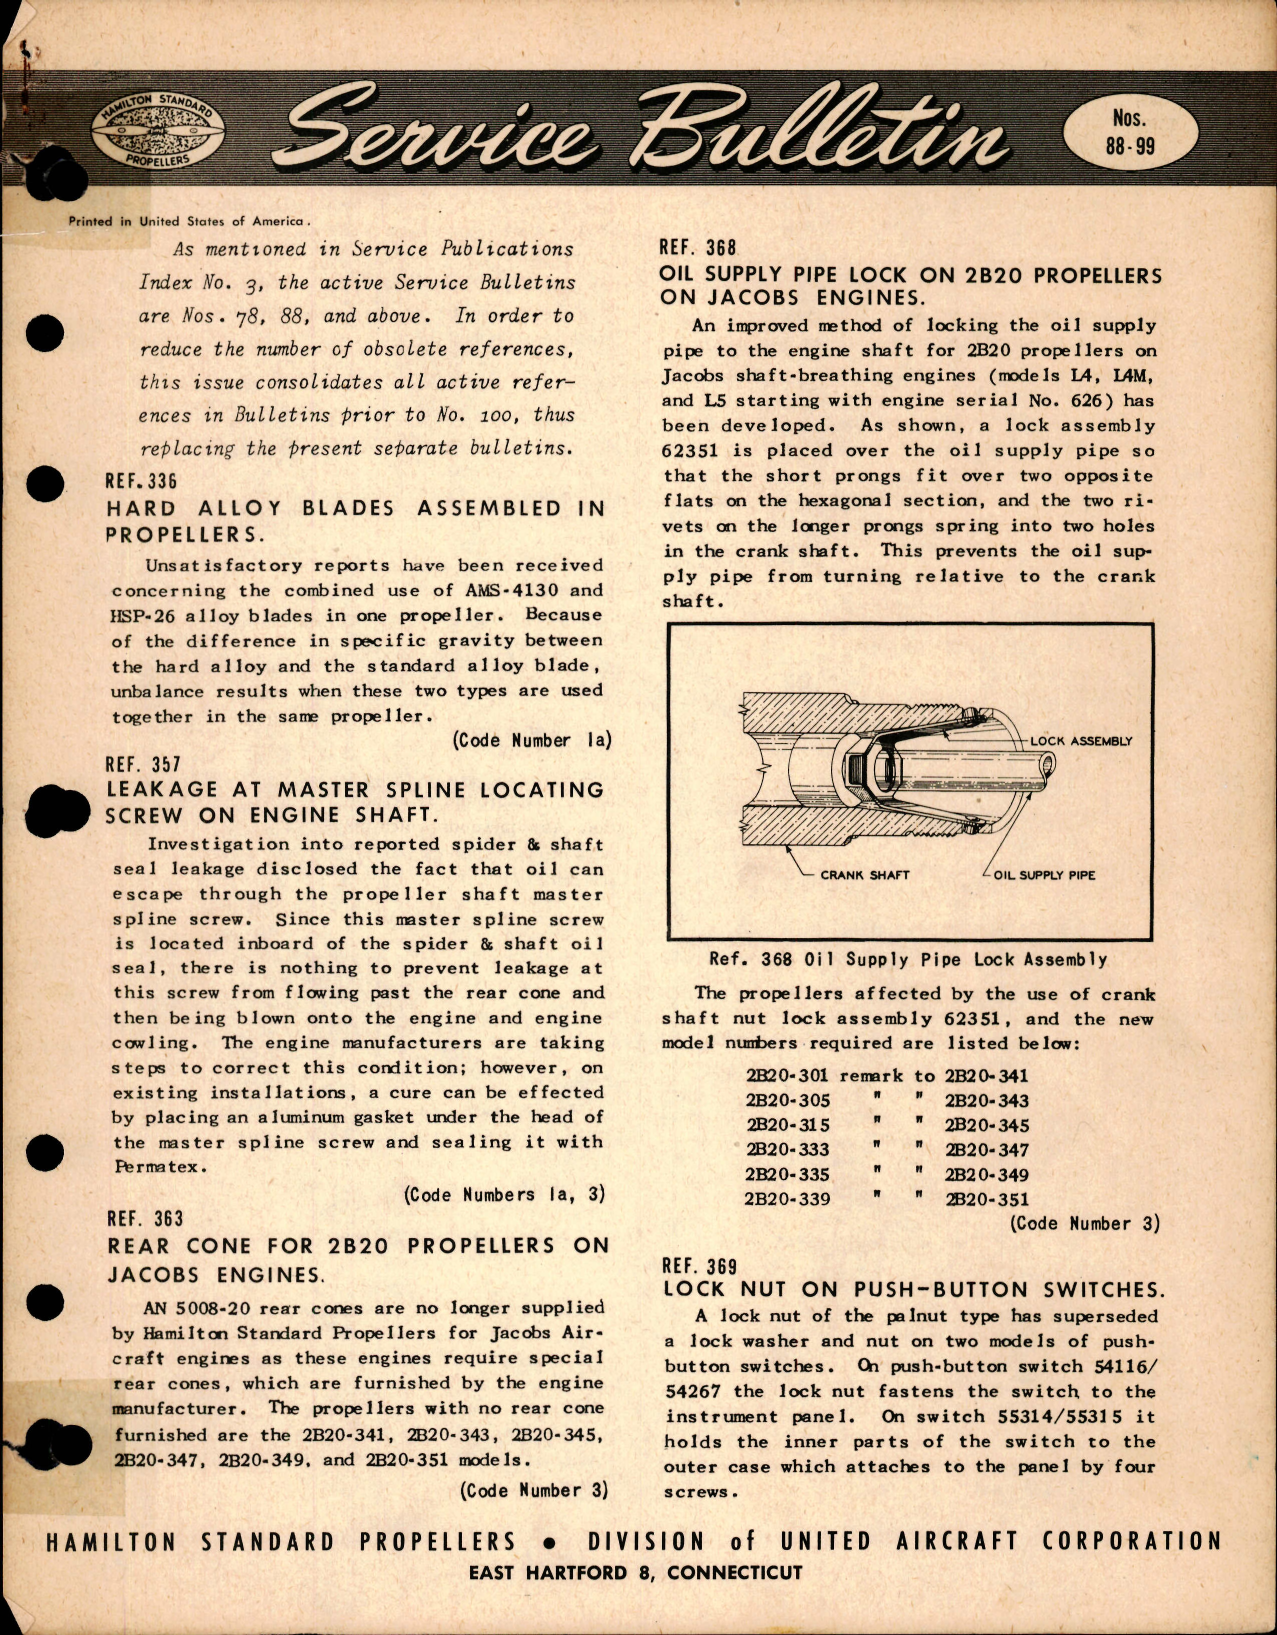 Sample page 1 from AirCorps Library document: Hard Alloy Blades Assembled in Propellers, Ref 336